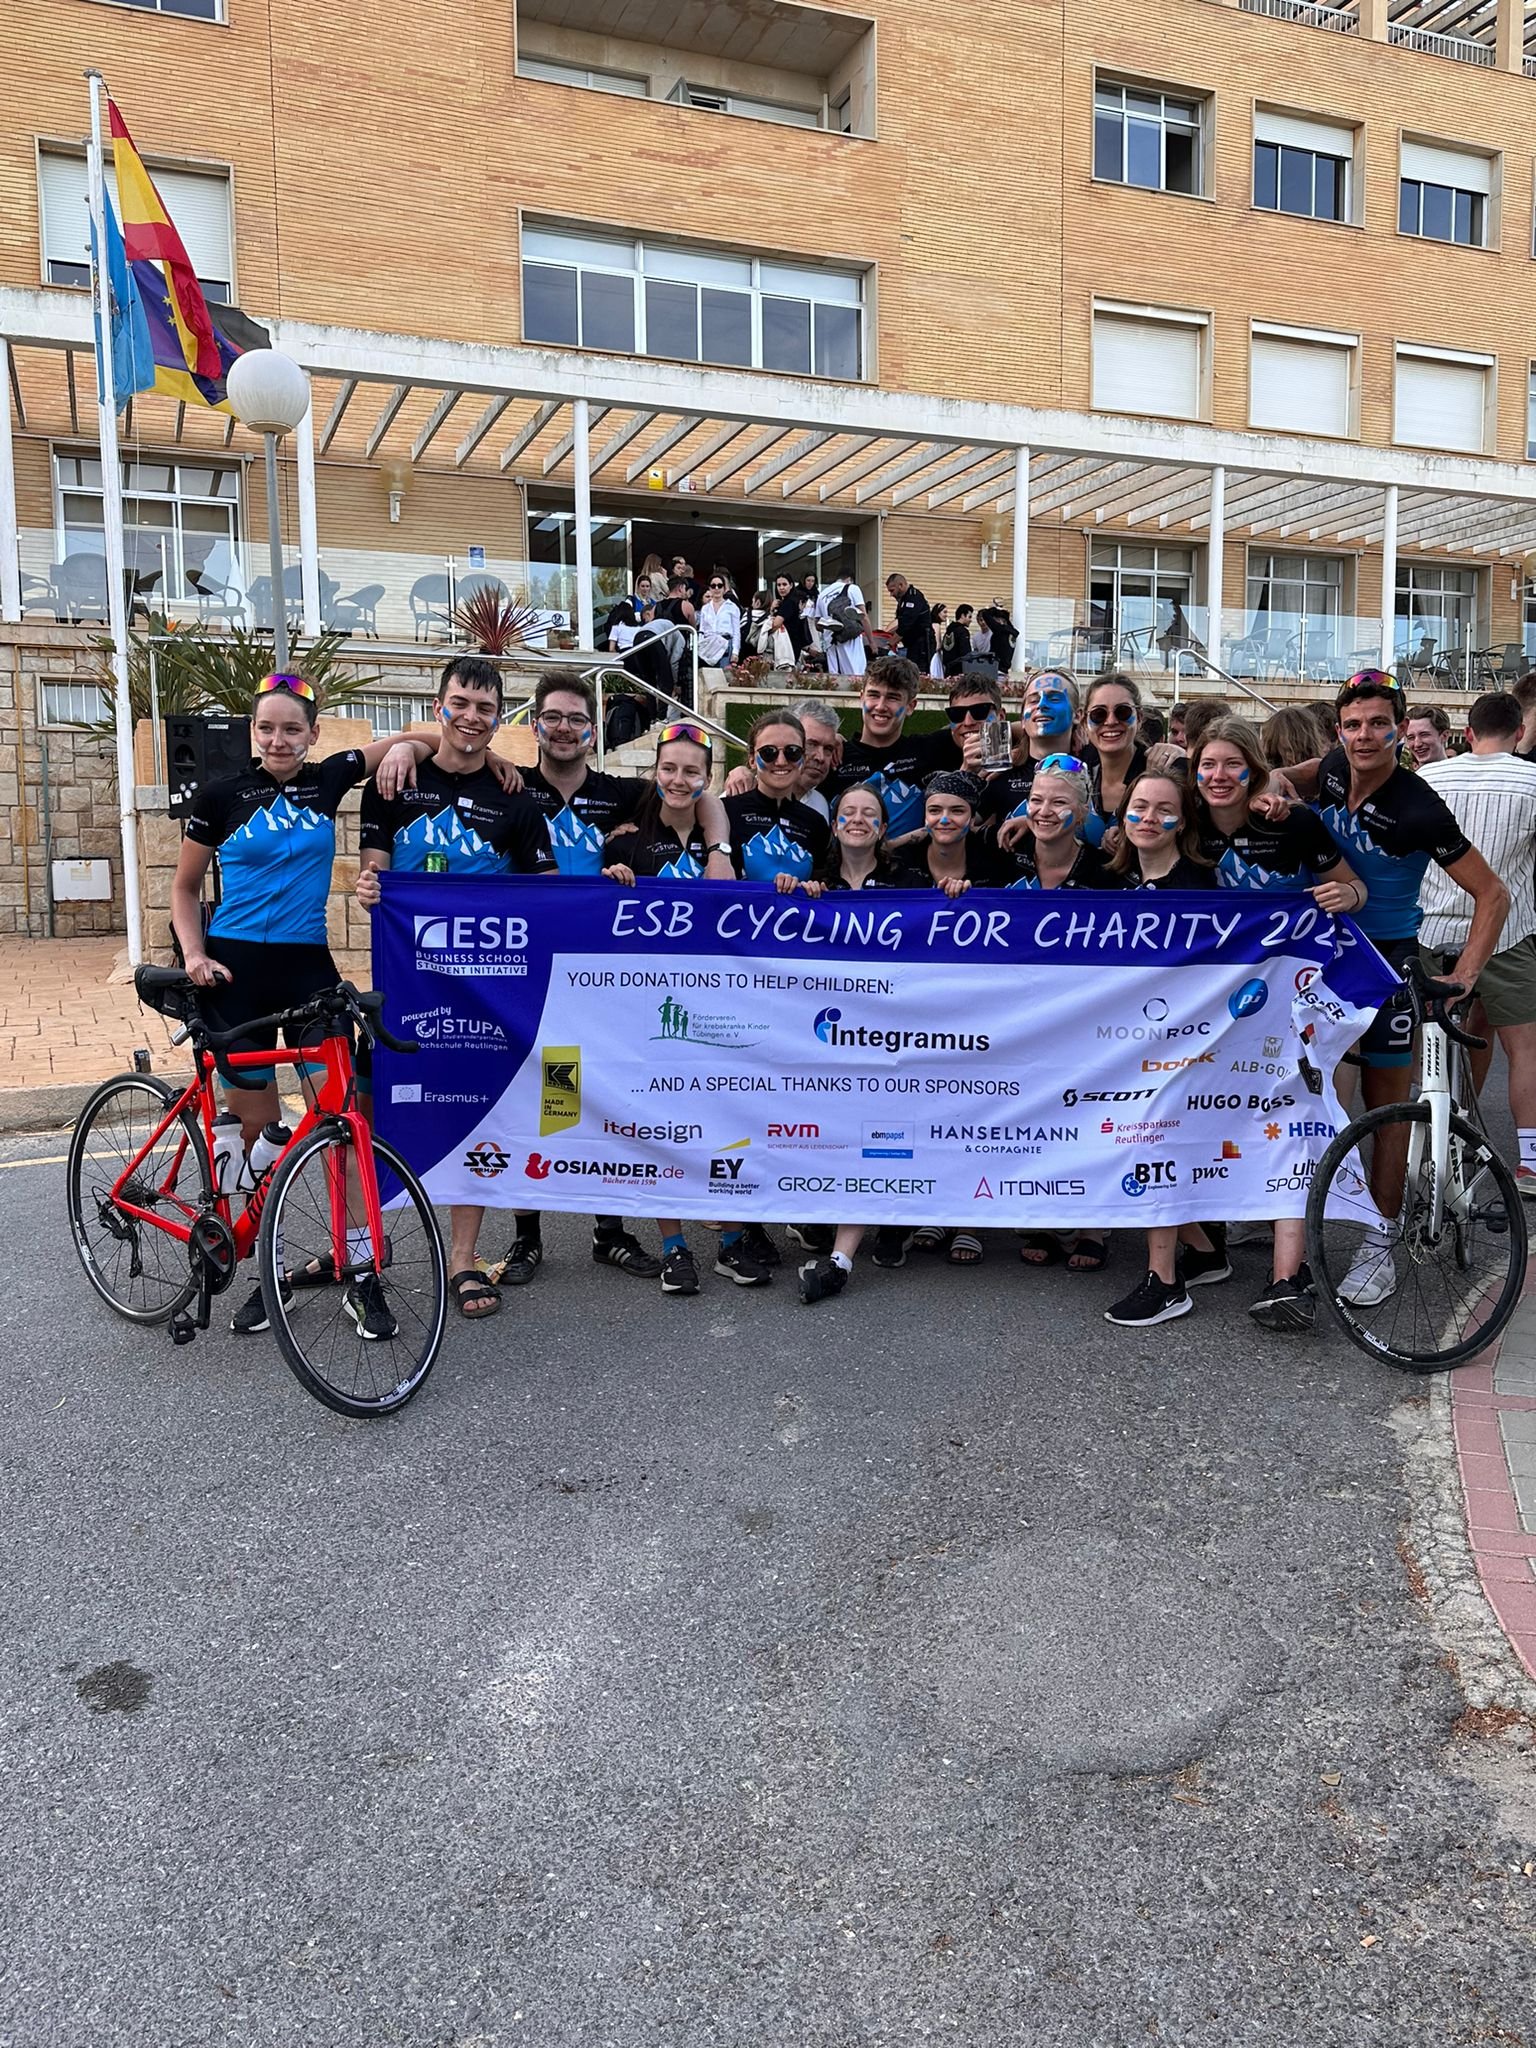 ESB Cycling for Charity 2023: ITONICS Supports as a Sponsor